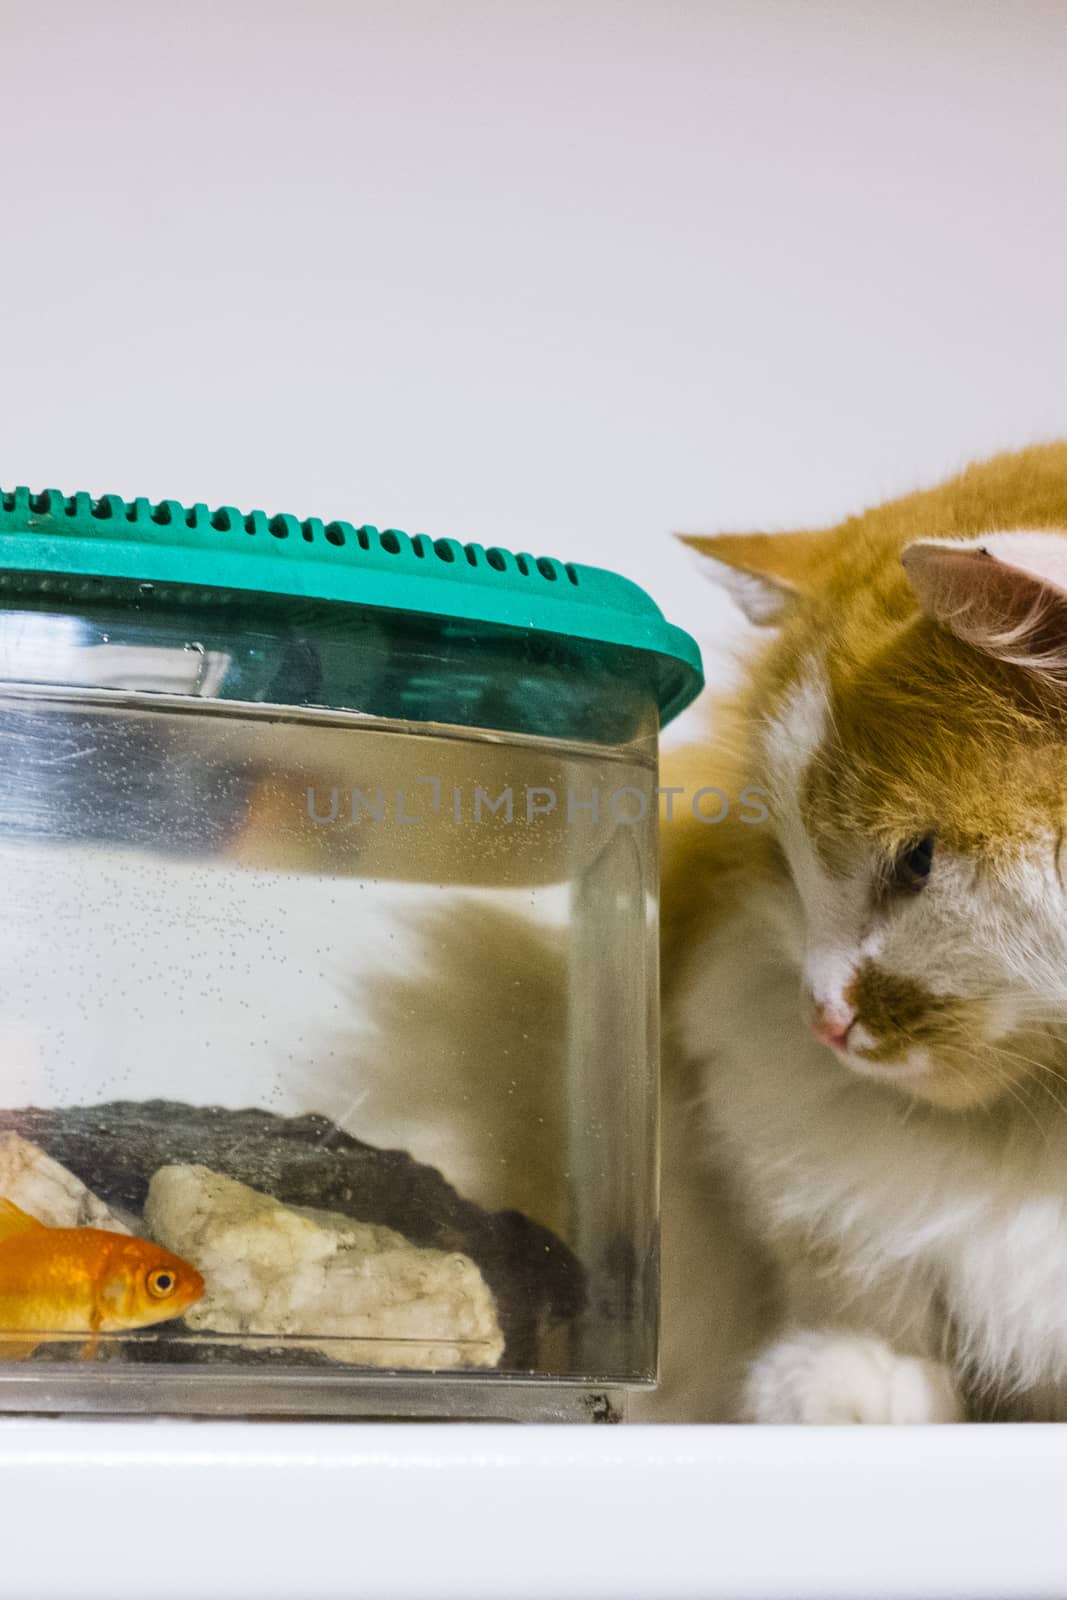 red and white cat looks with great curiosity goldfish in the aquarium at home